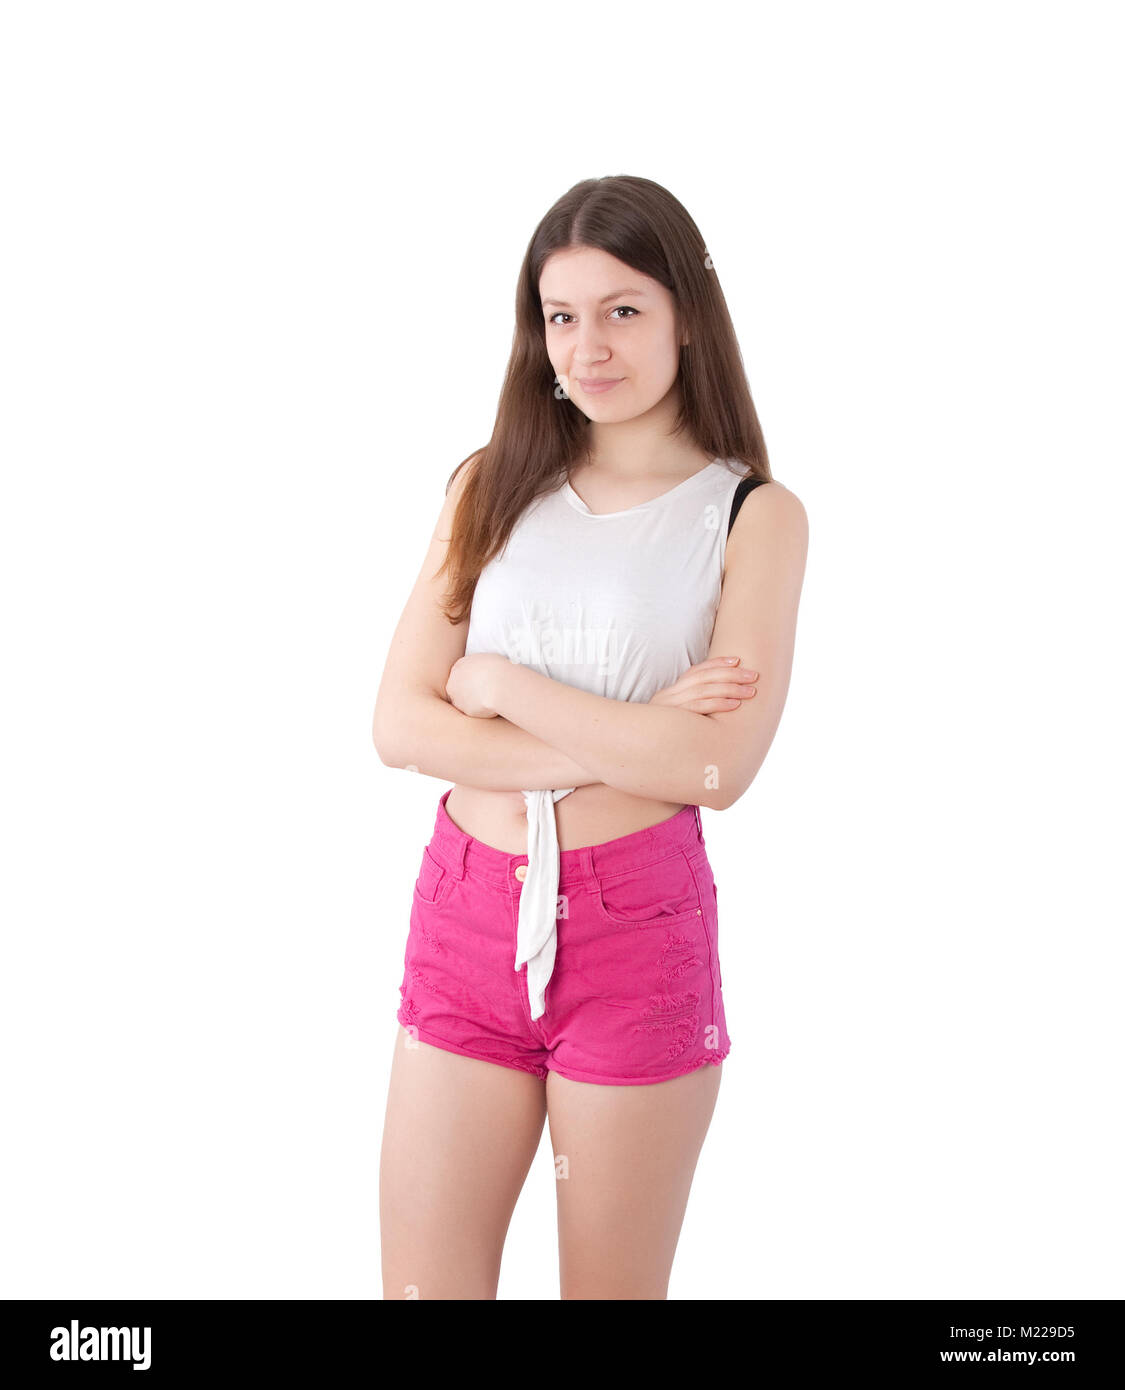 young beautiful teenage girl on a white background Stock Photo